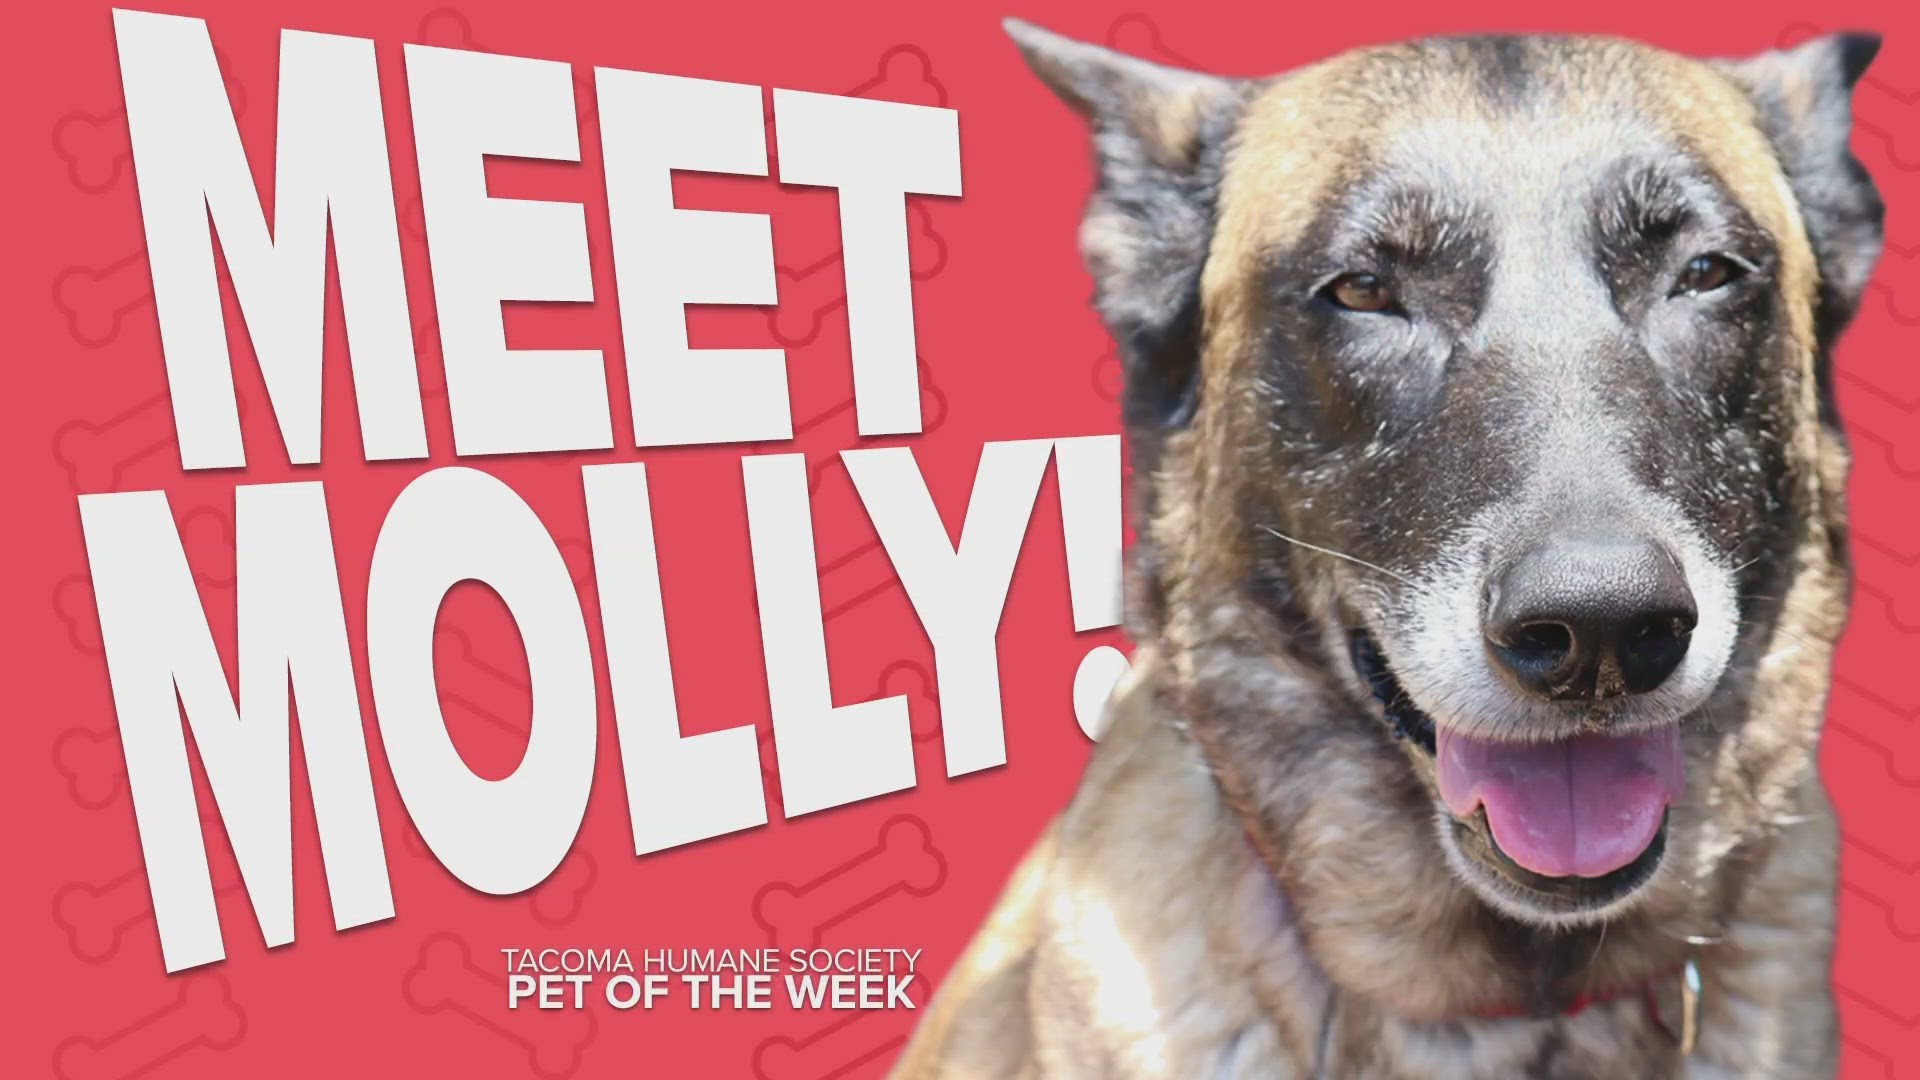 This week's featured adoptable pet is Molly!